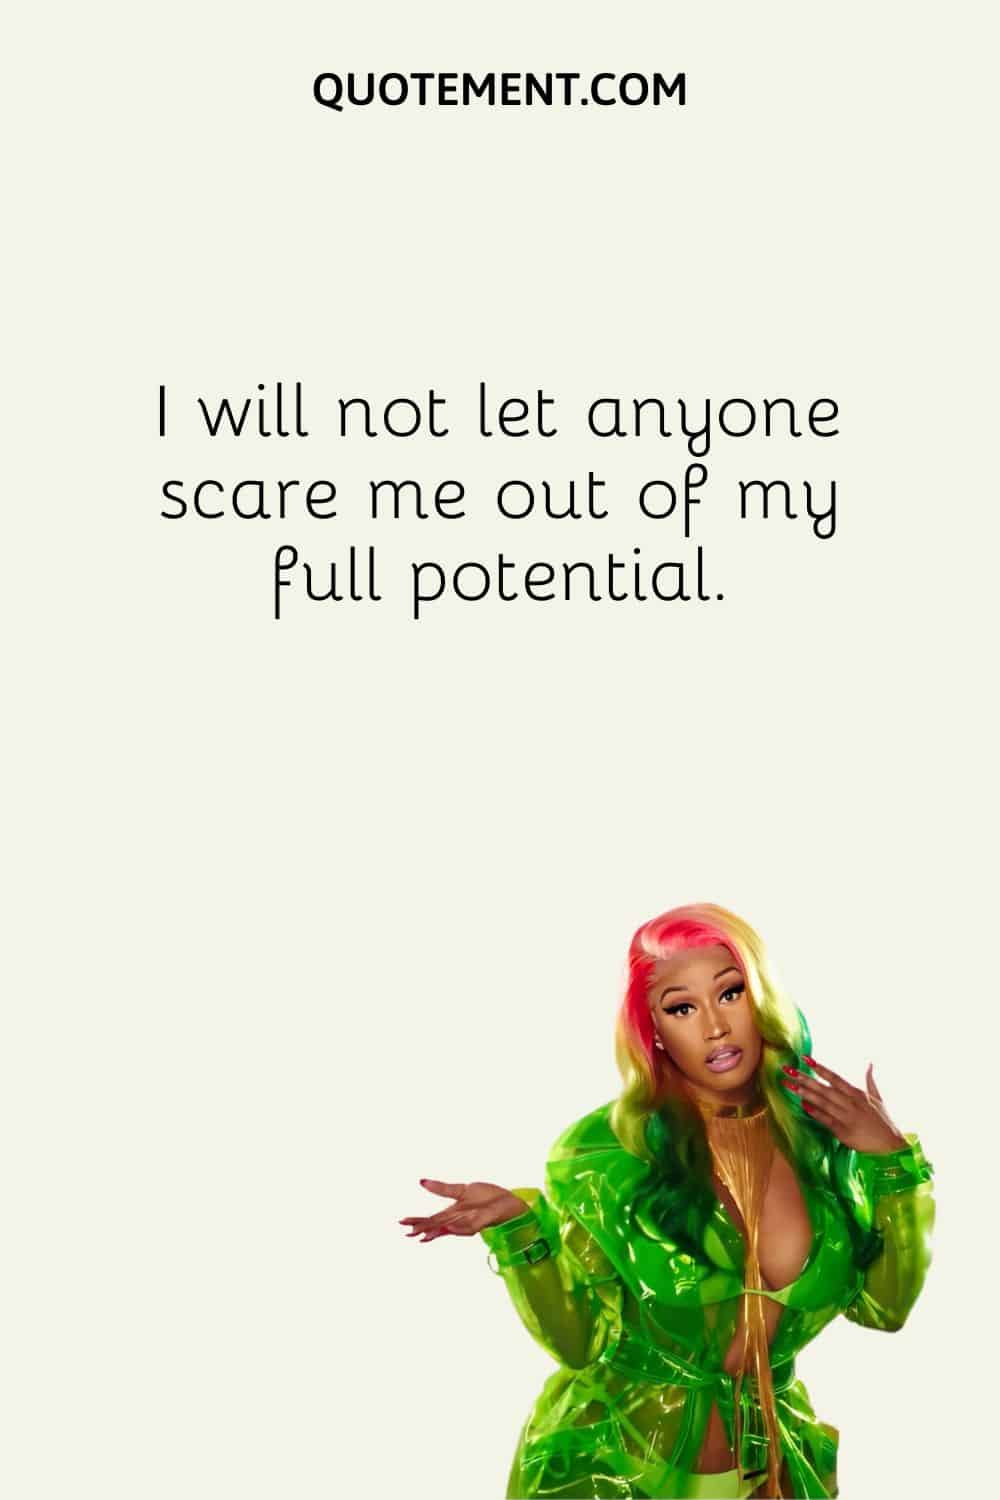 I will not let anyone scare me out of my full potential